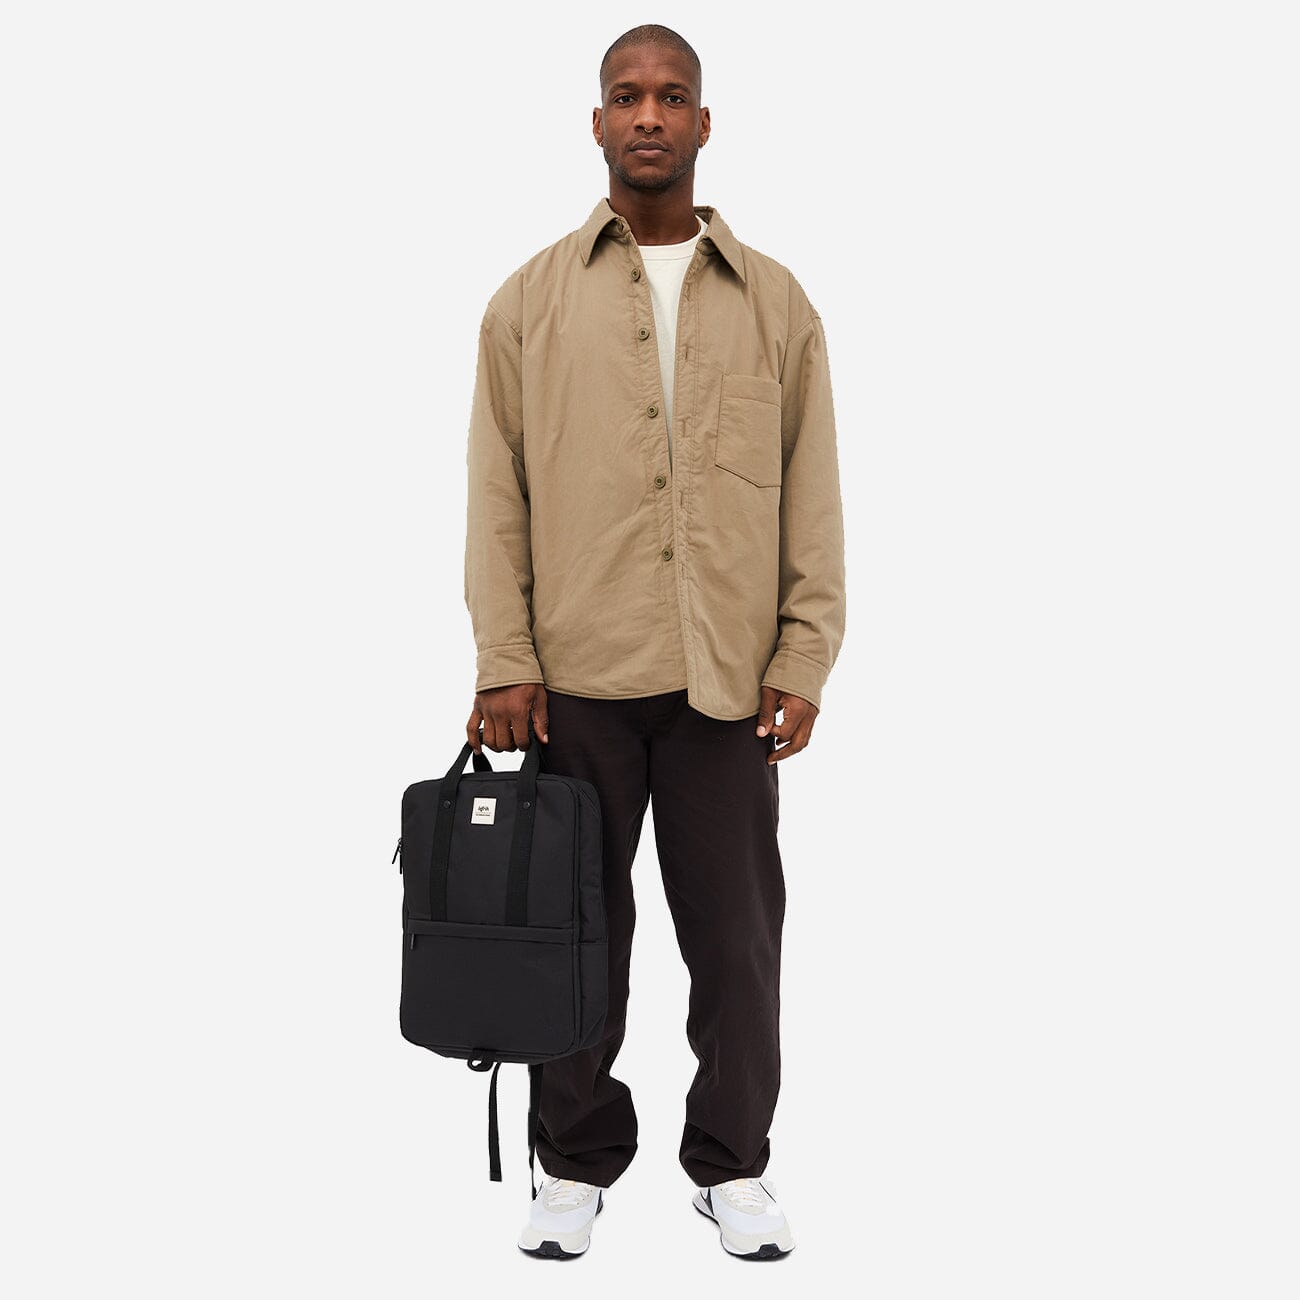 Man seen from the front holding an environmentally friendly black bag